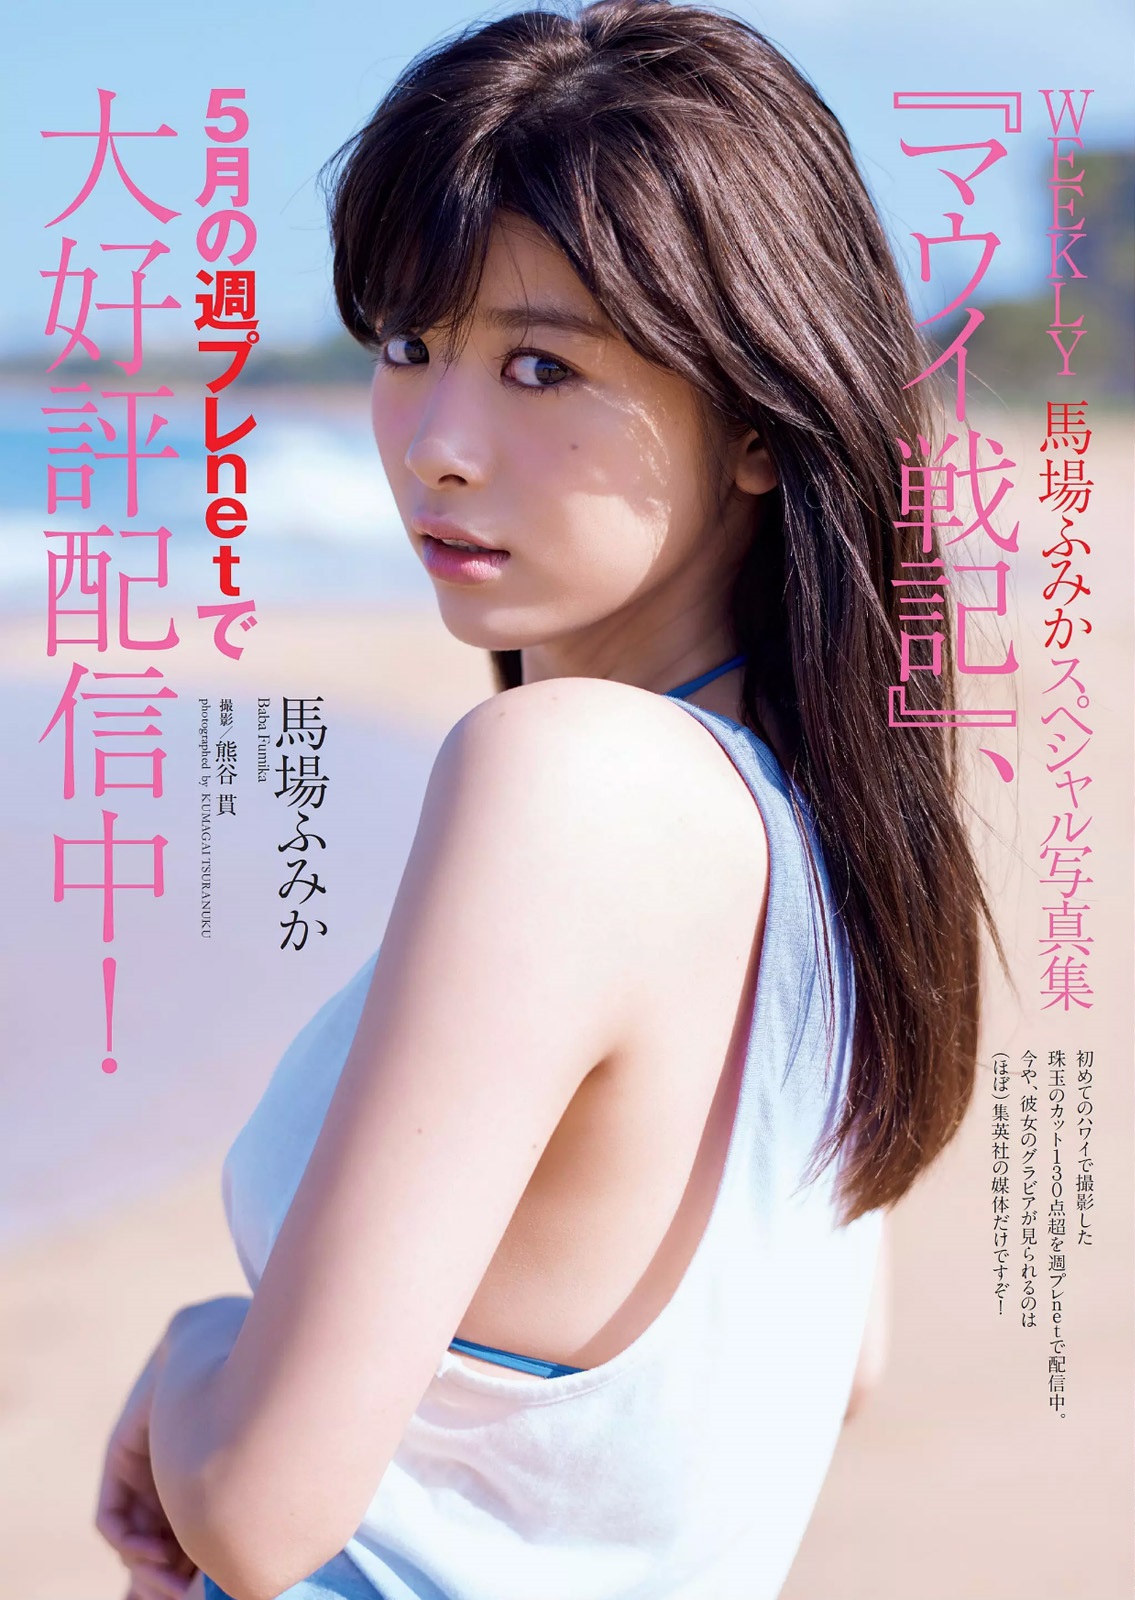 Nao Kanzaki And A Few Friends Fumika Baba Two New Mag Spreads And More